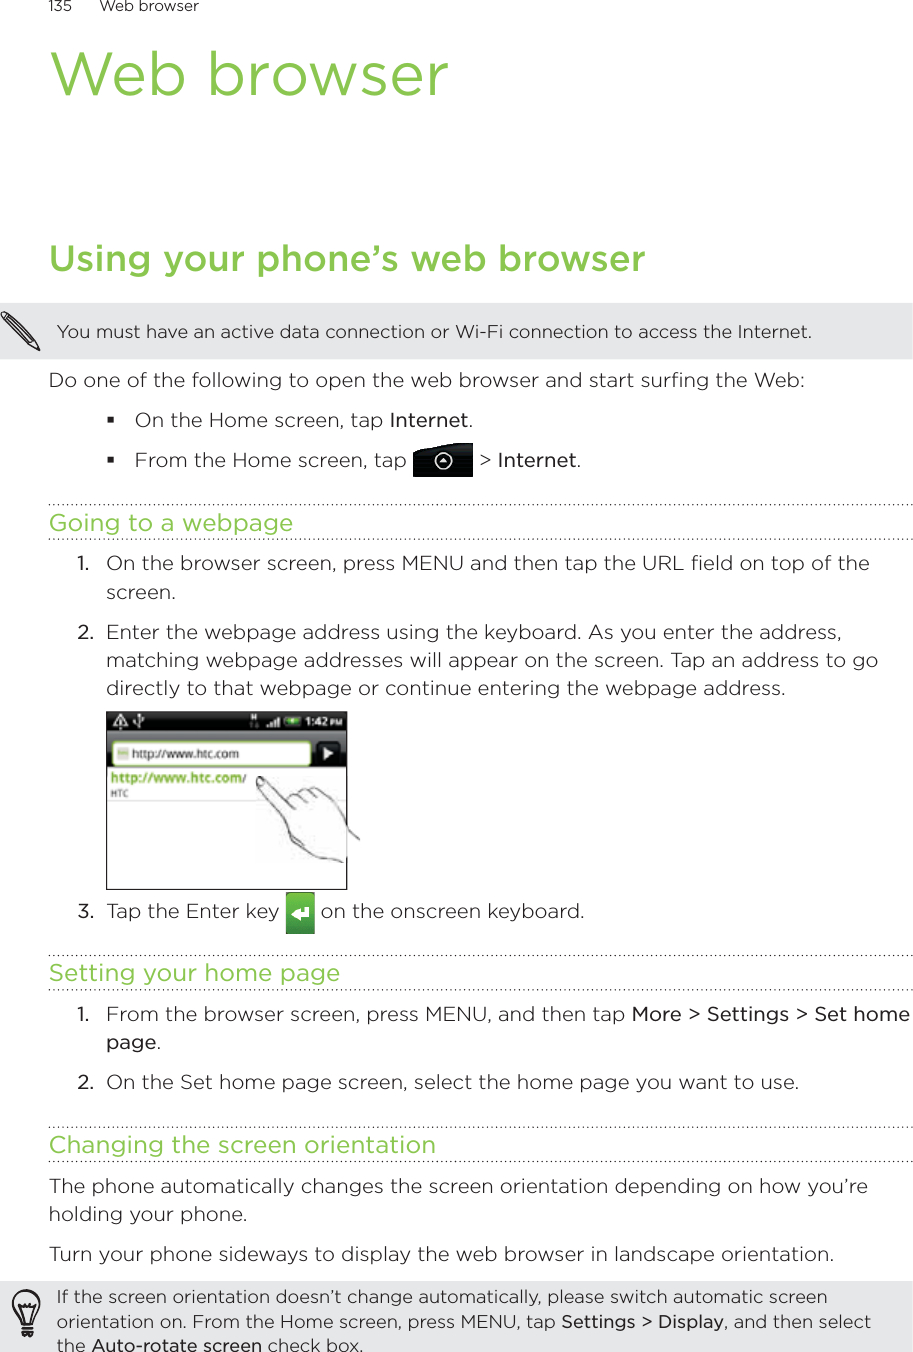 135      Web browser      Web browserUsing your phone’s web browserYou must have an active data connection or Wi-Fi connection to access the Internet.Do one of the following to open the web browser and start surfing the Web:On the Home screen, tap Internet.From the Home screen, tap  &gt; Internet.Going to a webpageOn the browser screen, press MENU and then tap the URL field on top of the screen.2.  Enter the webpage address using the keyboard. As you enter the address, matching webpage addresses will appear on the screen. Tap an address to go directly to that webpage or continue entering the webpage address.3.  Tap the Enter key   on the onscreen keyboard.Setting your home pageFrom the browser screen, press MENU, and then tap More &gt; Settings &gt; Set home page.On the Set home page screen, select the home page you want to use.Changing the screen orientationThe phone automatically changes the screen orientation depending on how you’re holding your phone. Turn your phone sideways to display the web browser in landscape orientation.If the screen orientation doesn’t change automatically, please switch automatic screen orientation on. From the Home screen, press MENU, tap Settings &gt; Display, and then select the Auto-rotate screen check box.1.1.2.